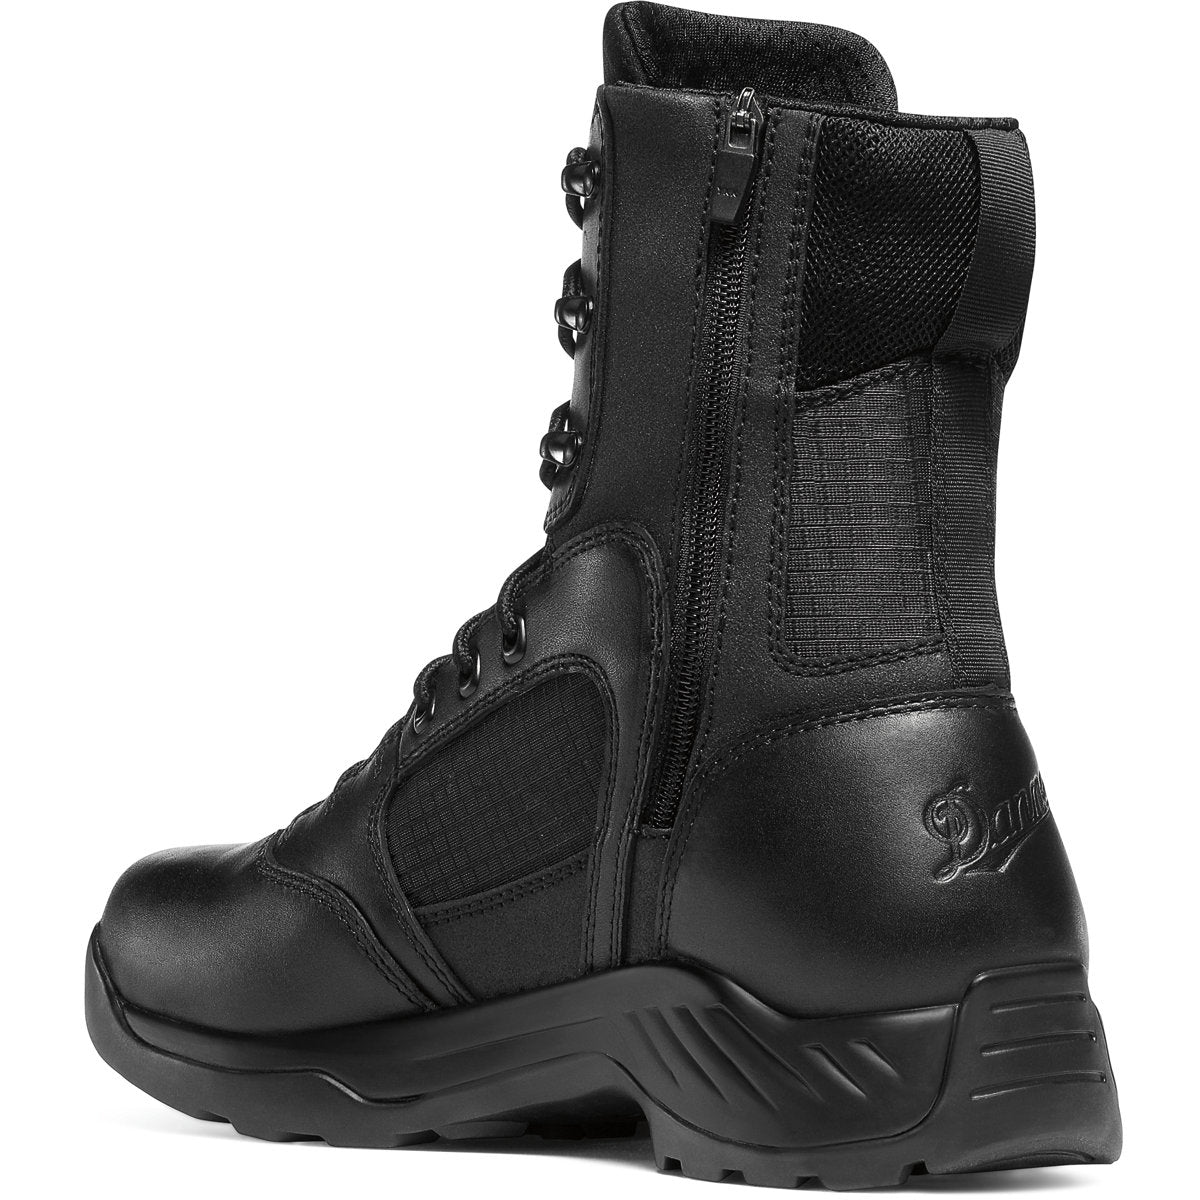 DANNER Kinetic 8" Black Side Zip Non-Insulated Boots